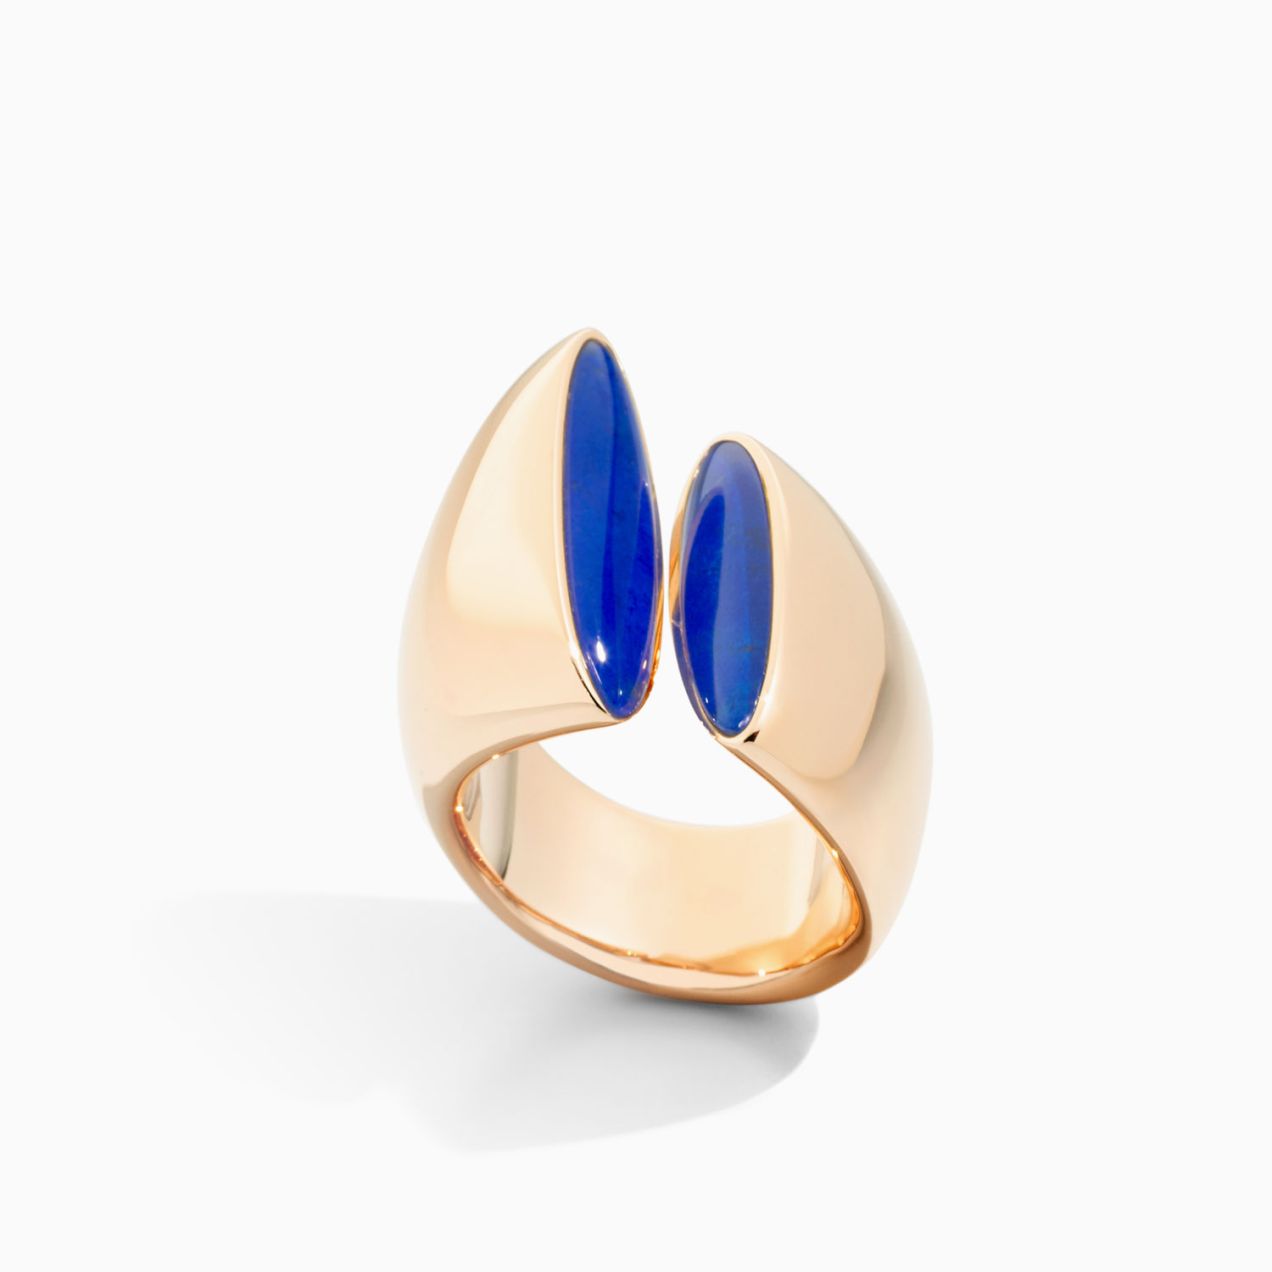 Vhernier eclisse ring in rose gold with quartz crystal and lapis lazuli